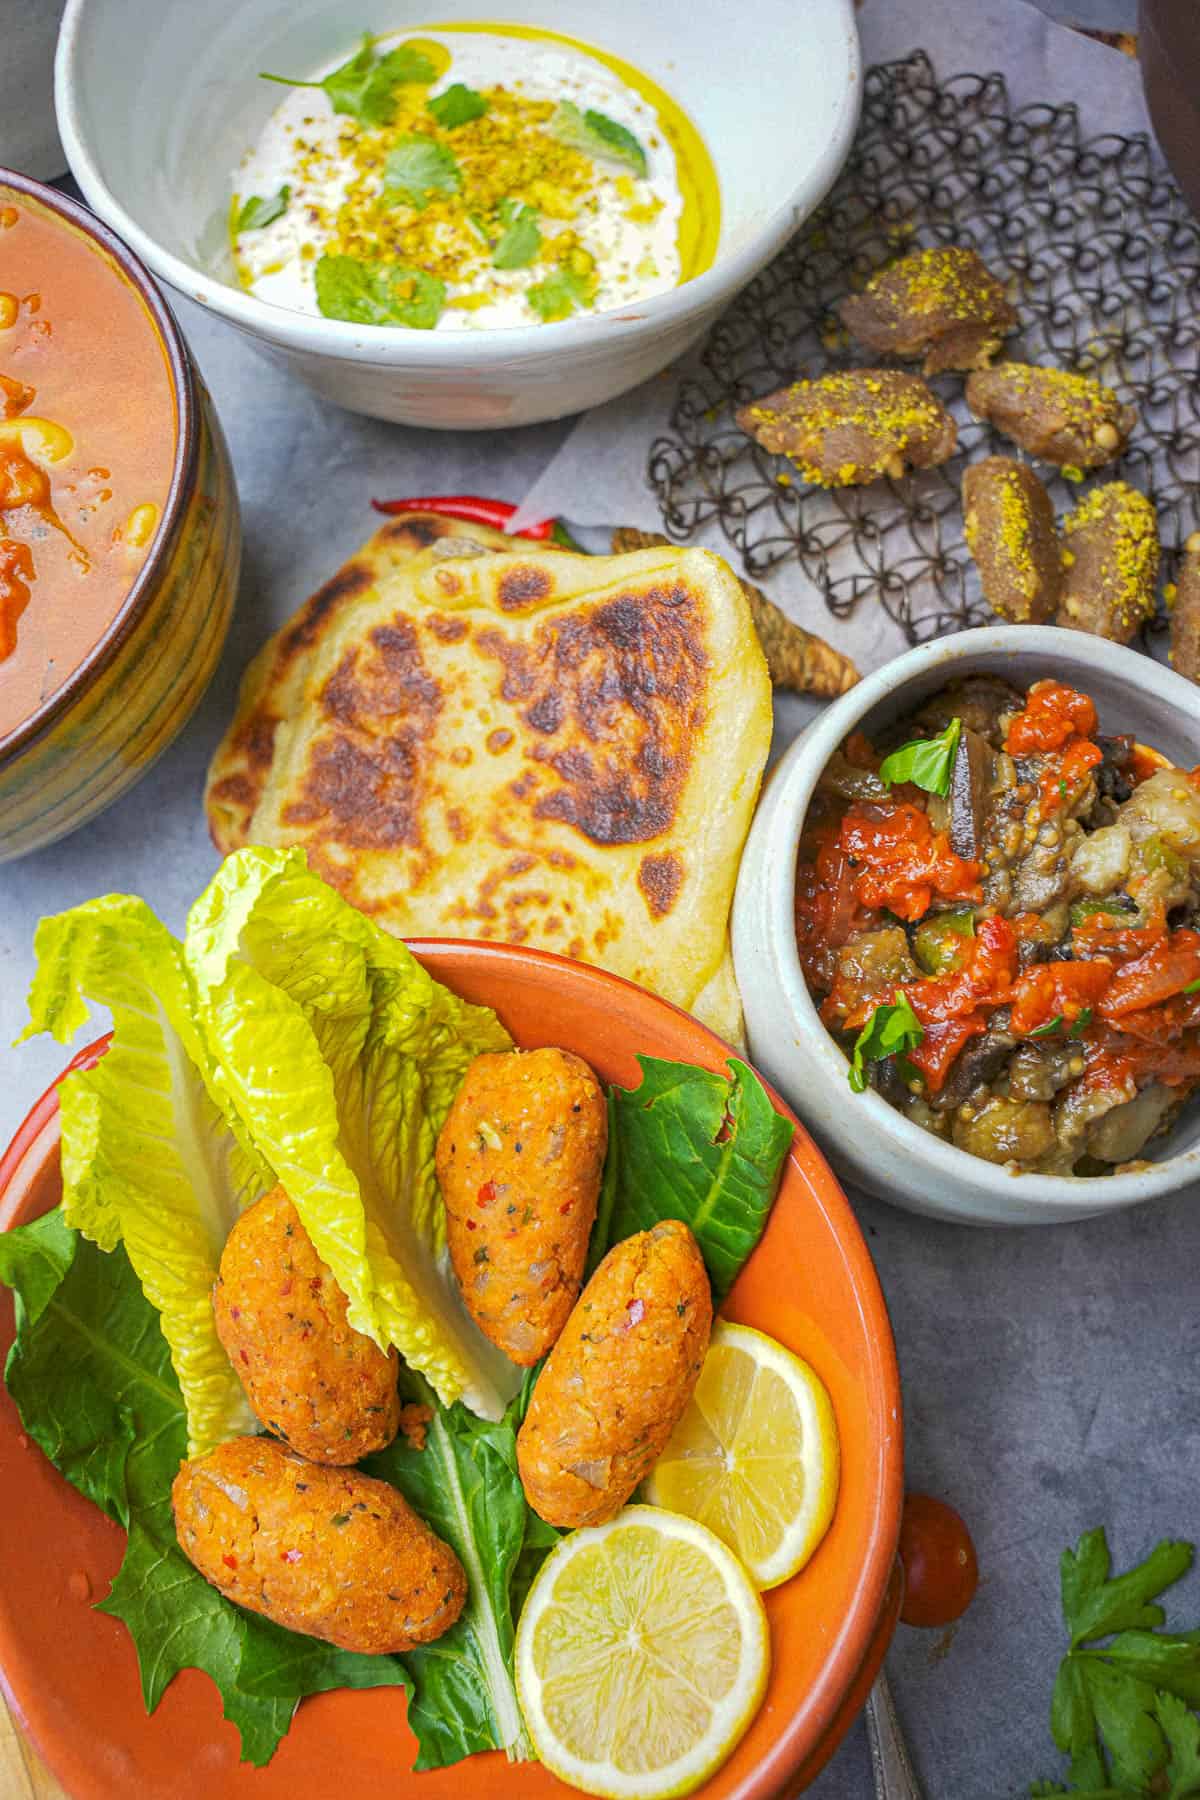 Kofte in an orange bowl with lettuce leave and lemon slices. Servings of labneh, msemen, irmik helvasi, loubia, and turkish Shakshuka are on the side.